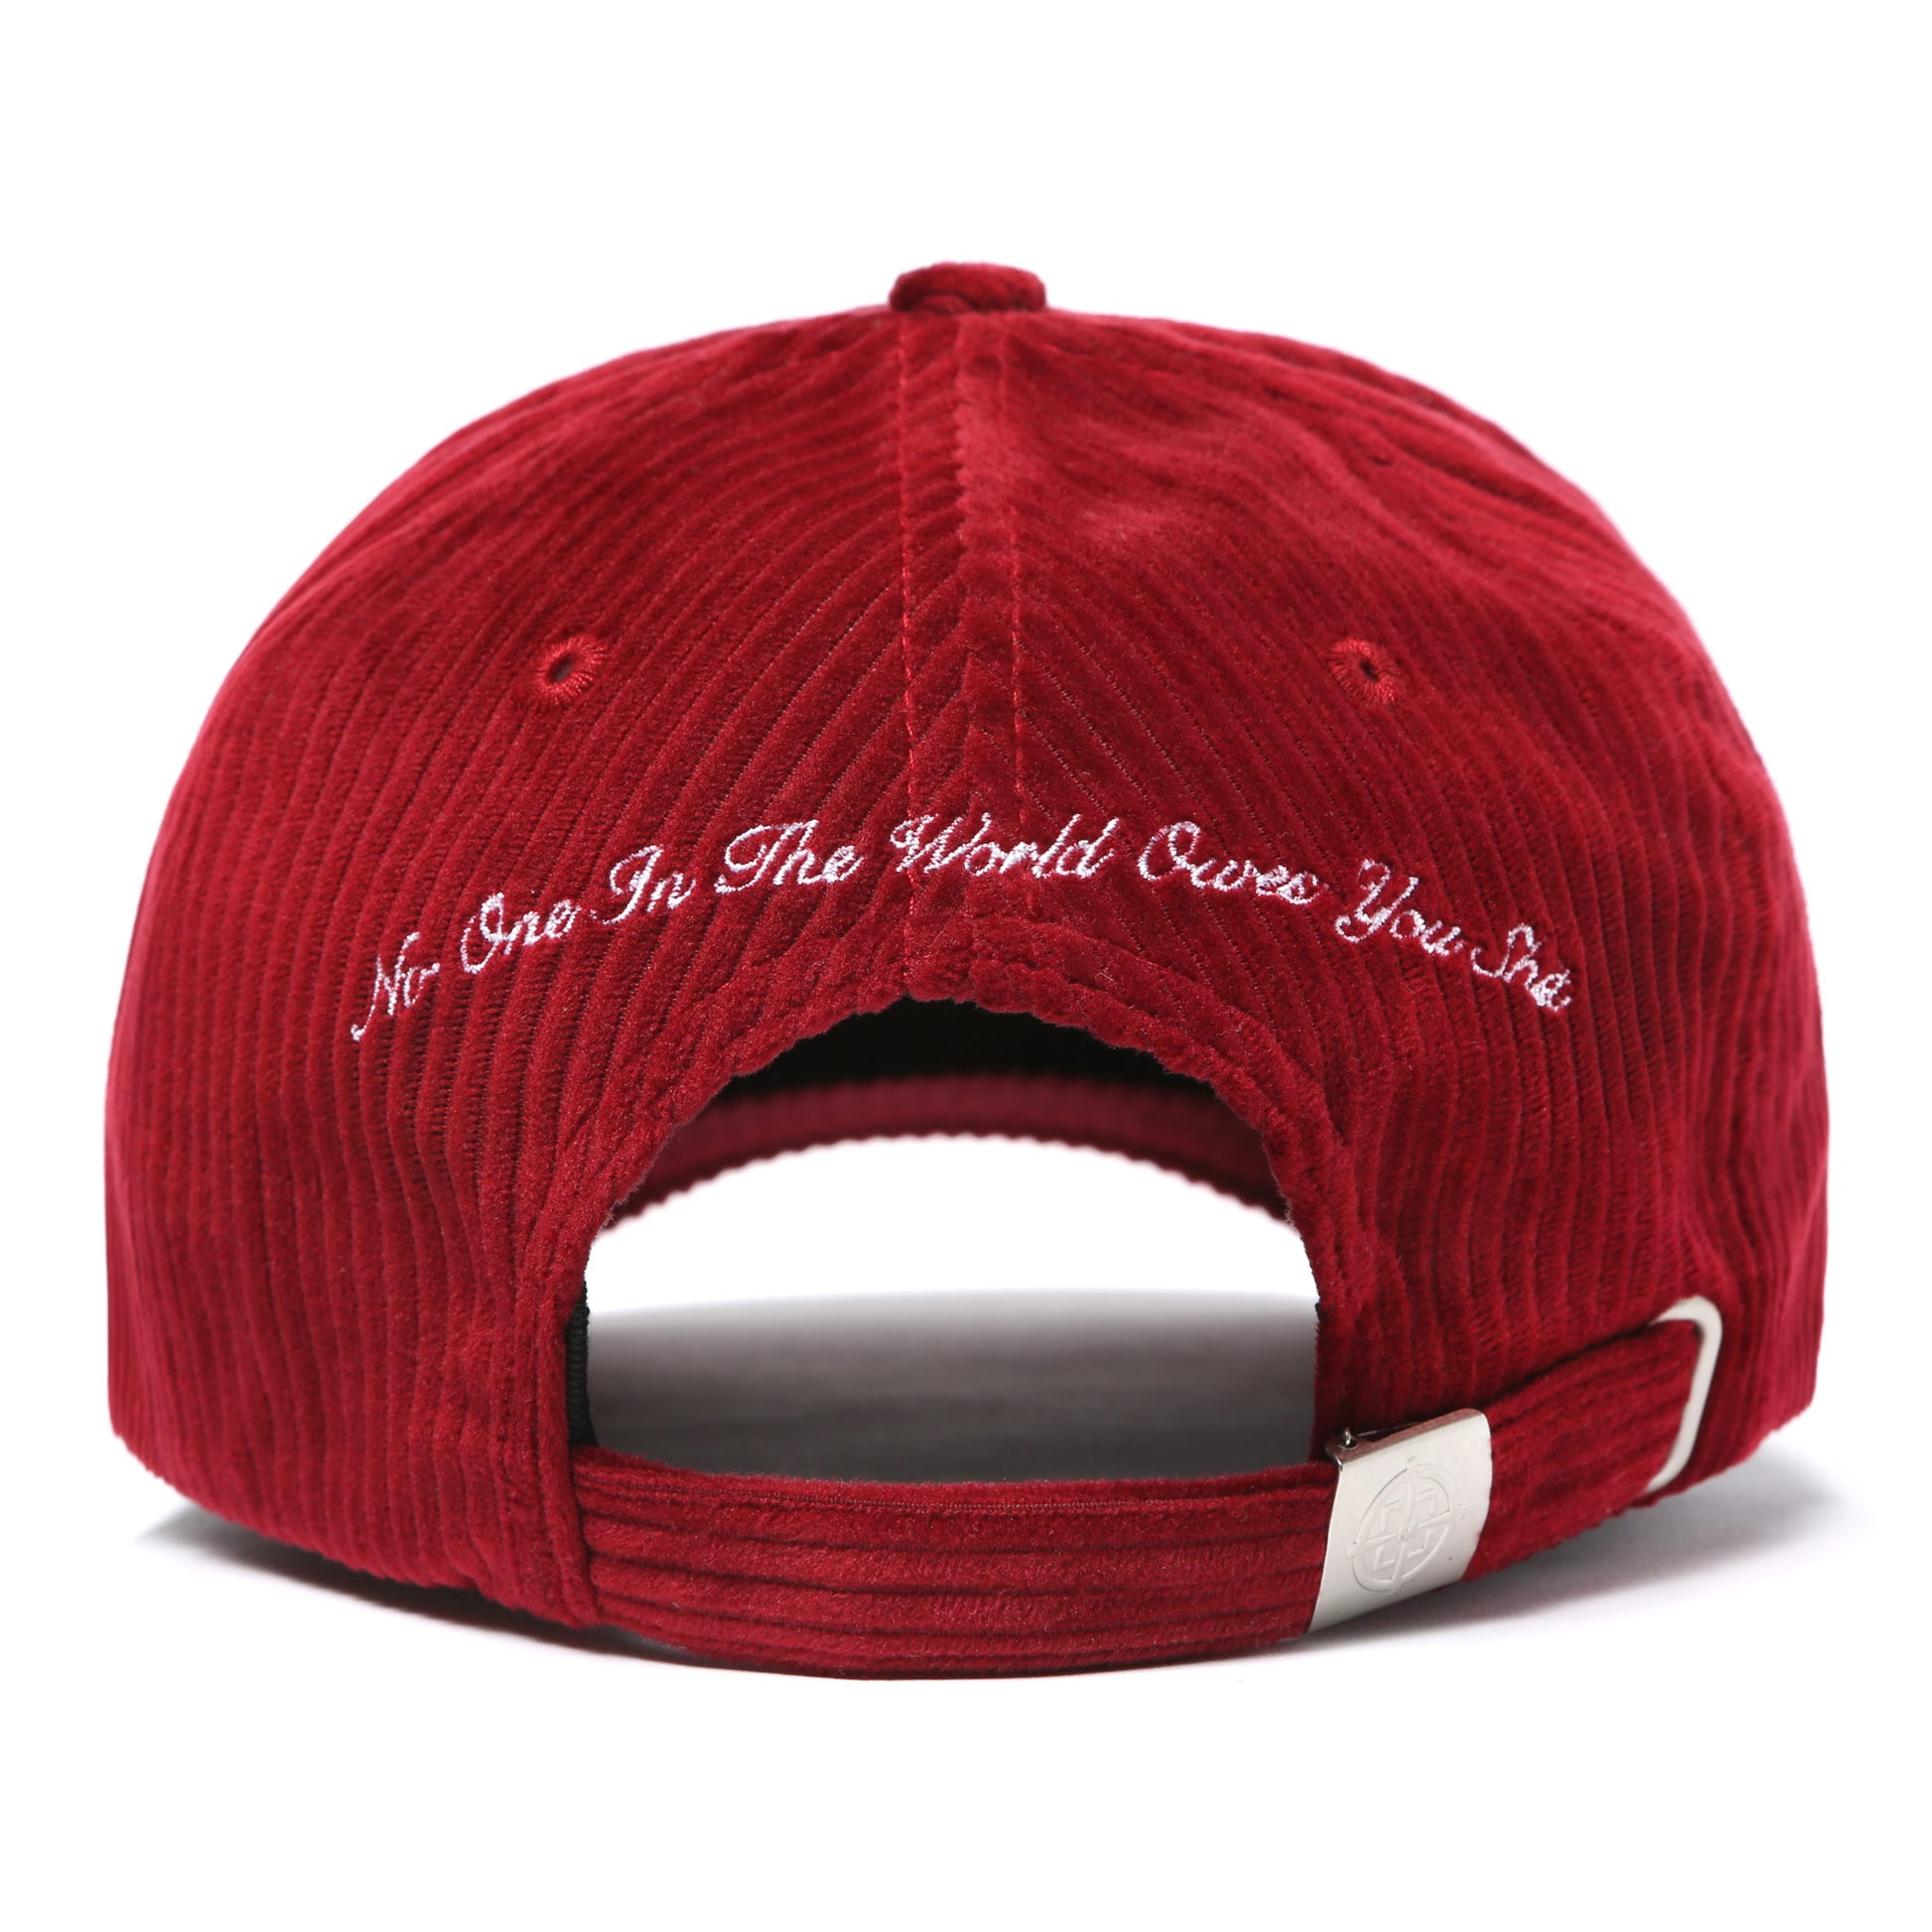 NO ONE IN THE WORLD OWES YOU SHIT CORDUROY LOGO CAP by MENACE